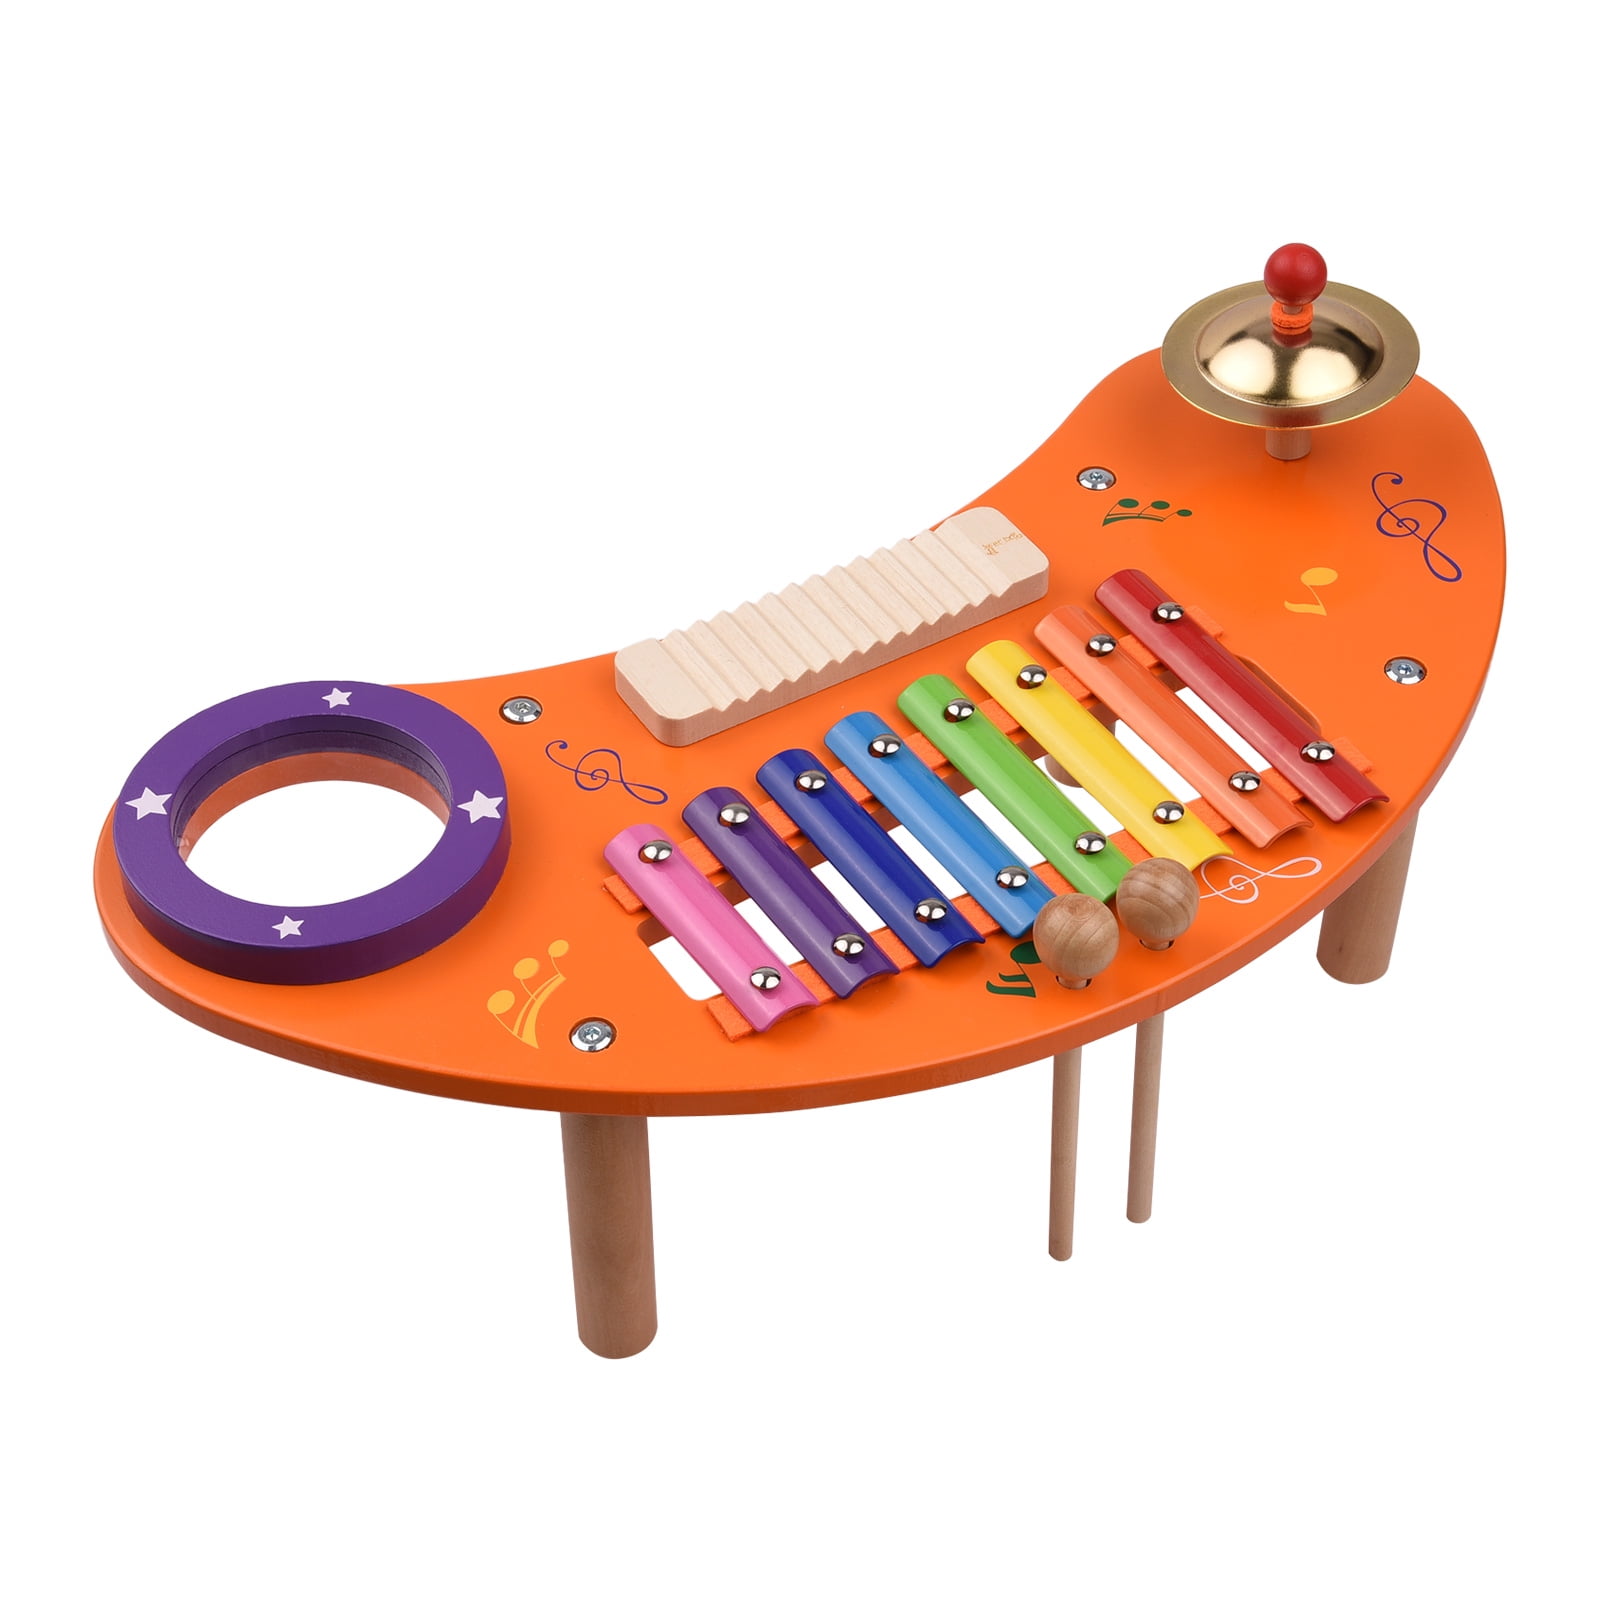 WEY&FLY Xylophone for Kids Musical Toy with Child Safe Mallets Children Educational Music Toys Perfectly Tuned Instrument 